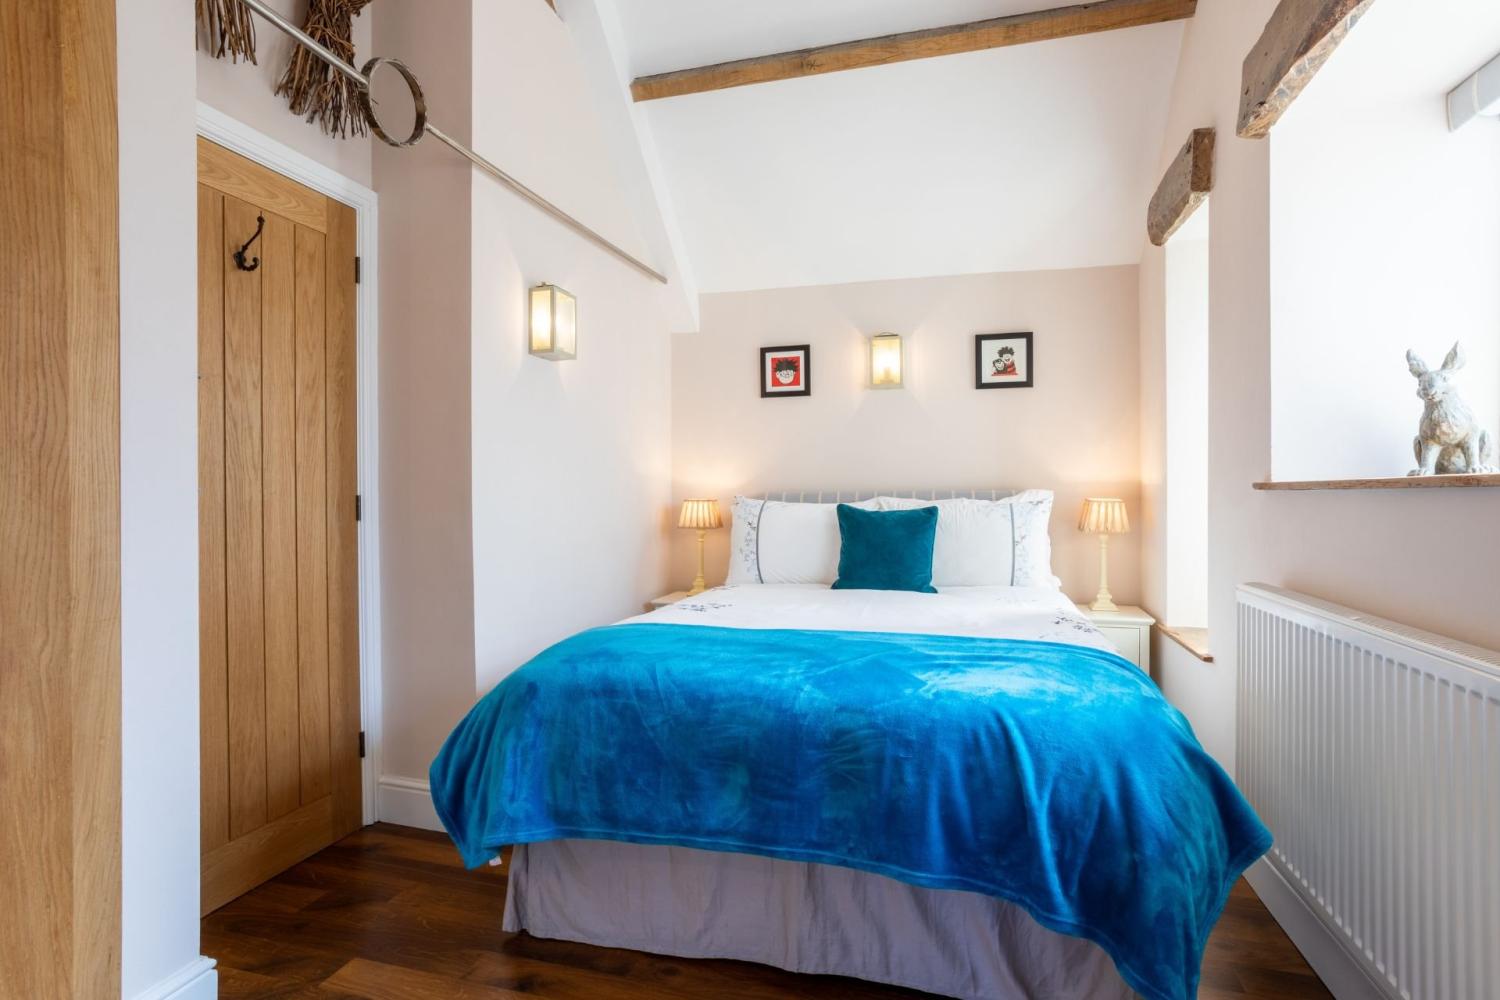 The Snug is a double bedroom on the first floor has a Hypnos mattress.